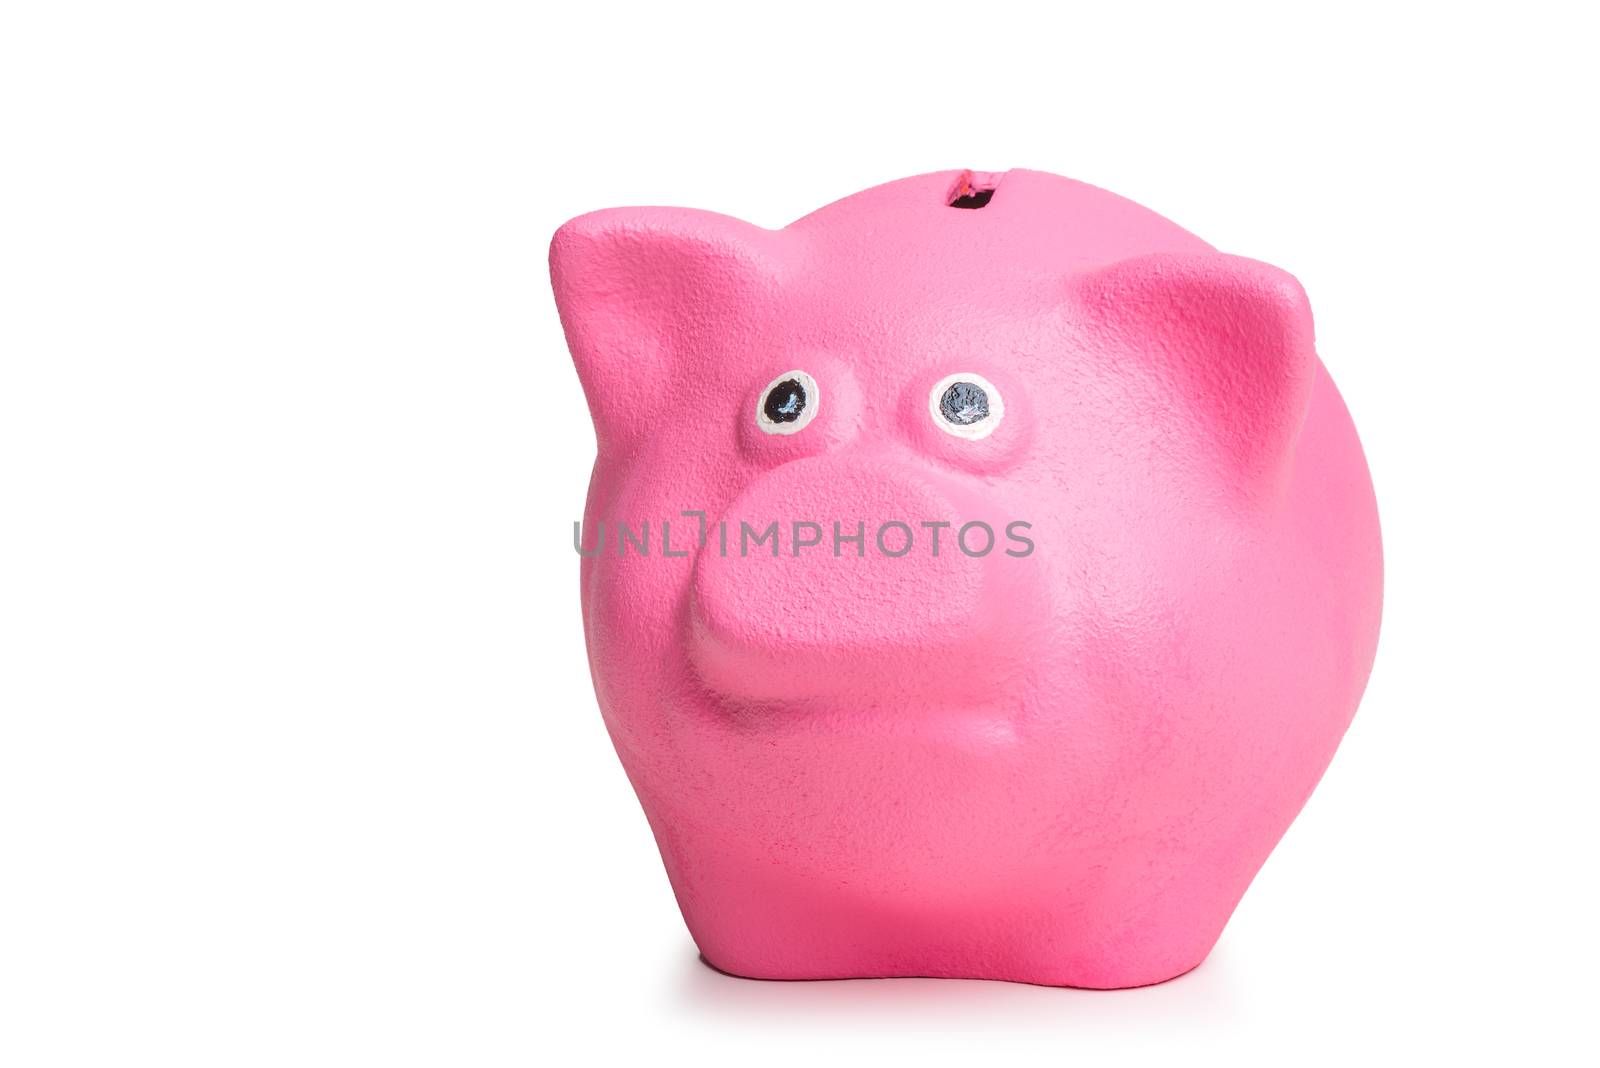 pink piggy bank on a white background isolated